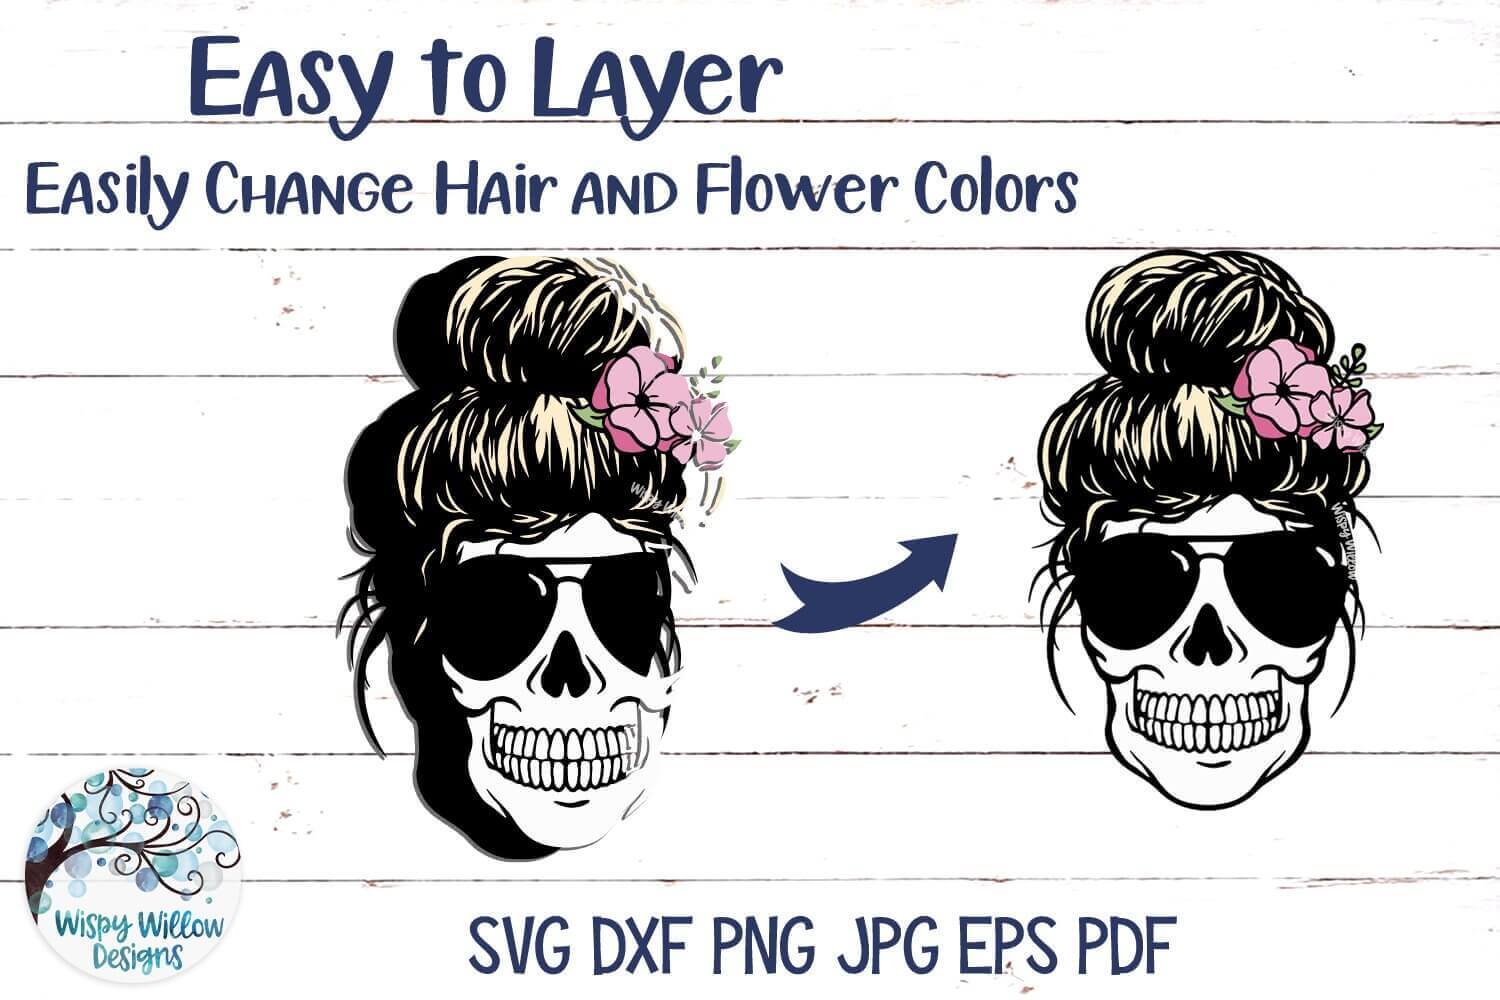 Easily Change Hair and Flower Colors.